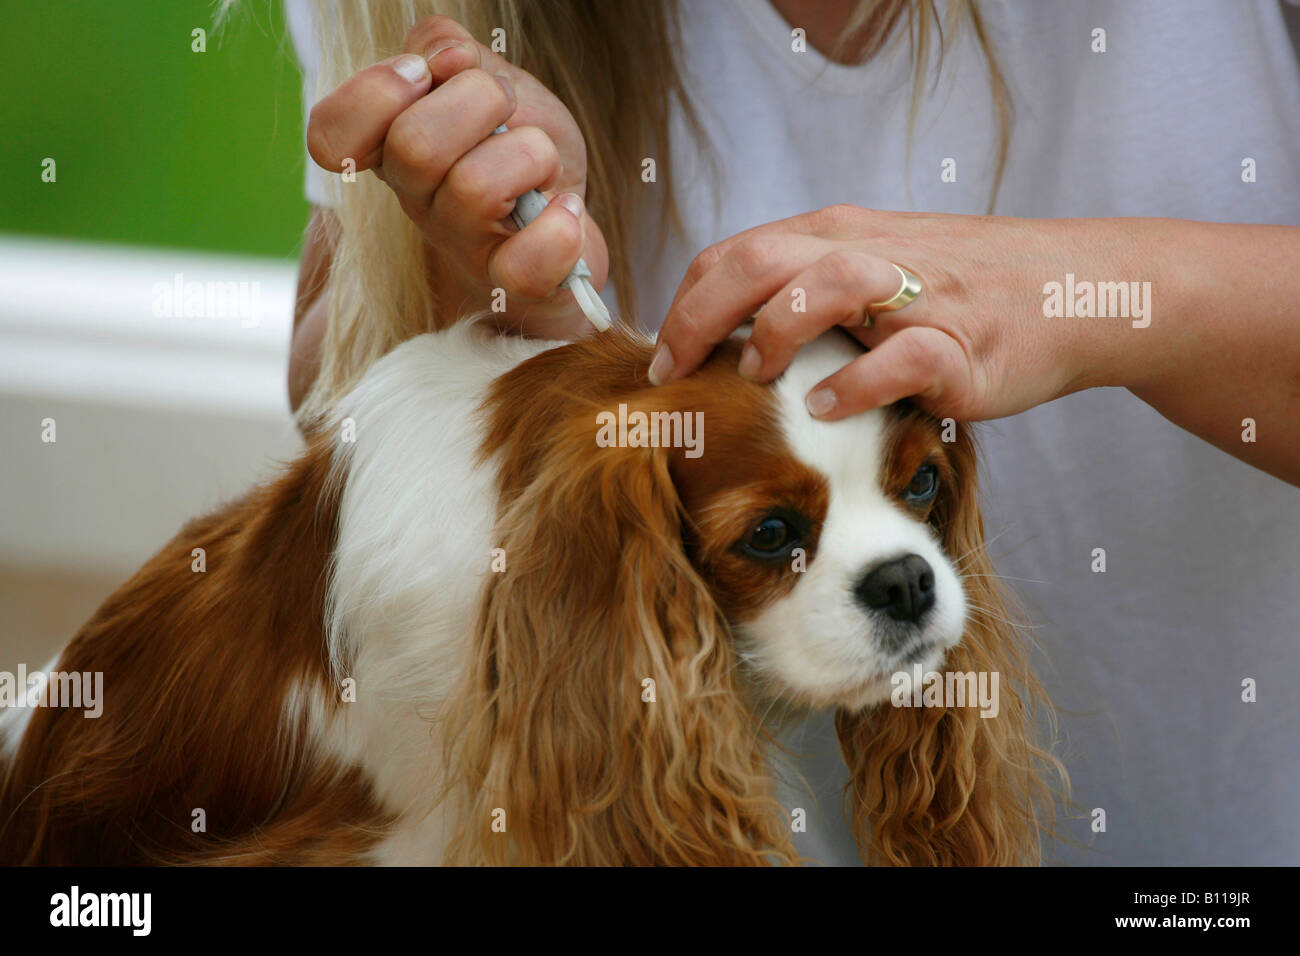 Woman removing tick from Cavalier King Charles Spaniel Stock Photo